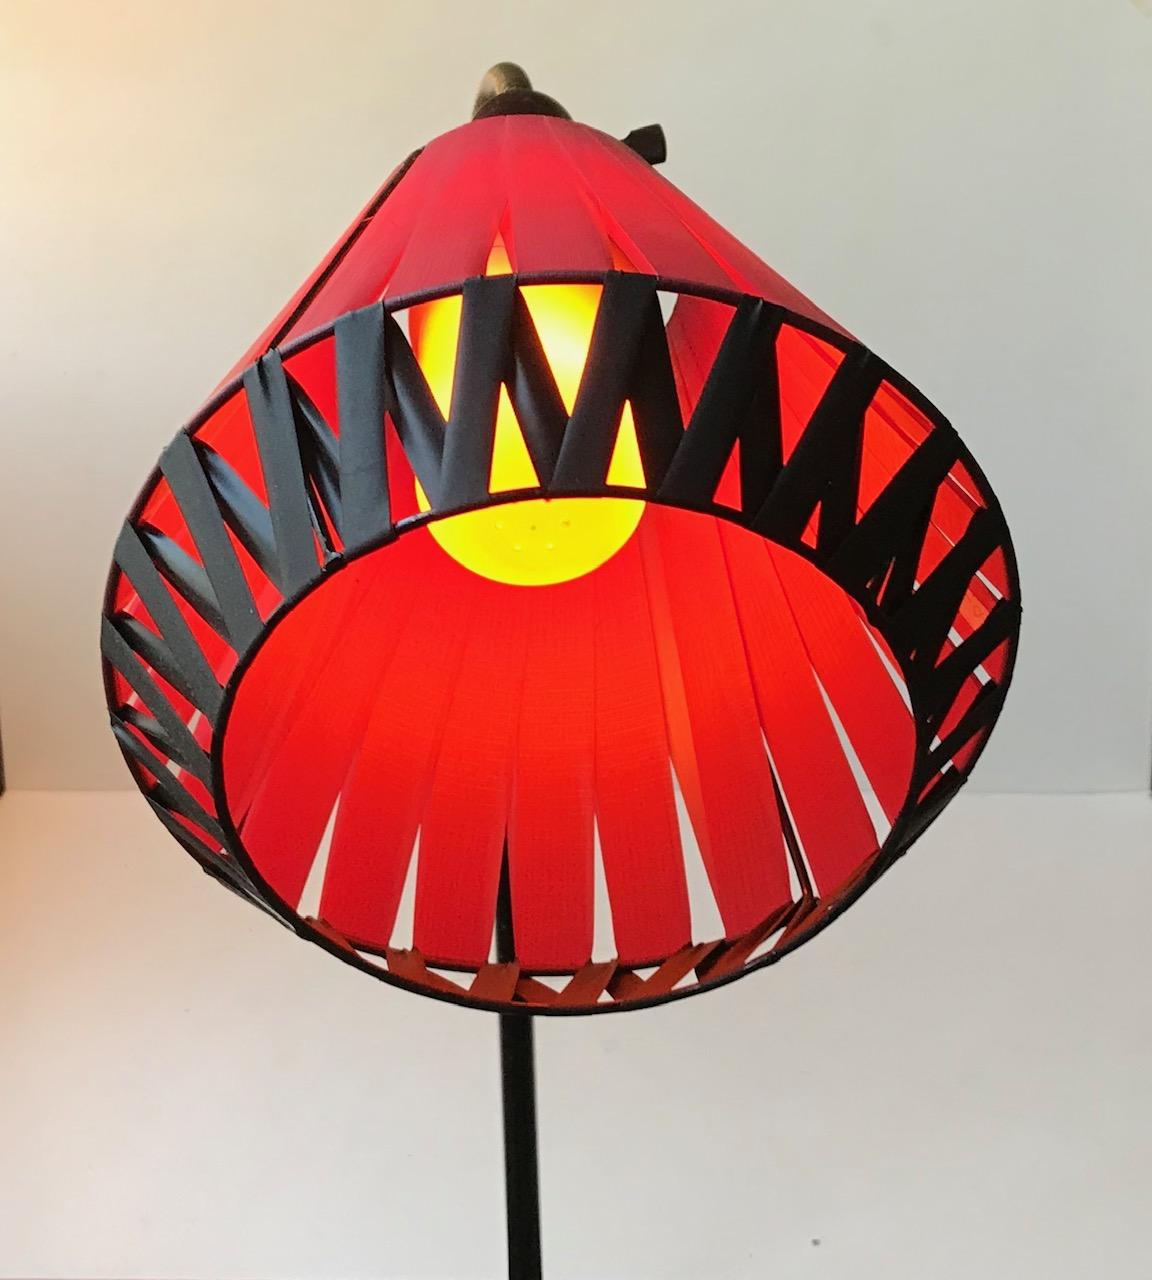 Original 1950s floor lamp featuring red/black textile wrapped shade, flexible brass gooseneck, easy accessable on/off switch at the shade and a asymmetrical base with brass accents. Anonymous Scandinavian maker circa 1950 in the style of Svend Aage